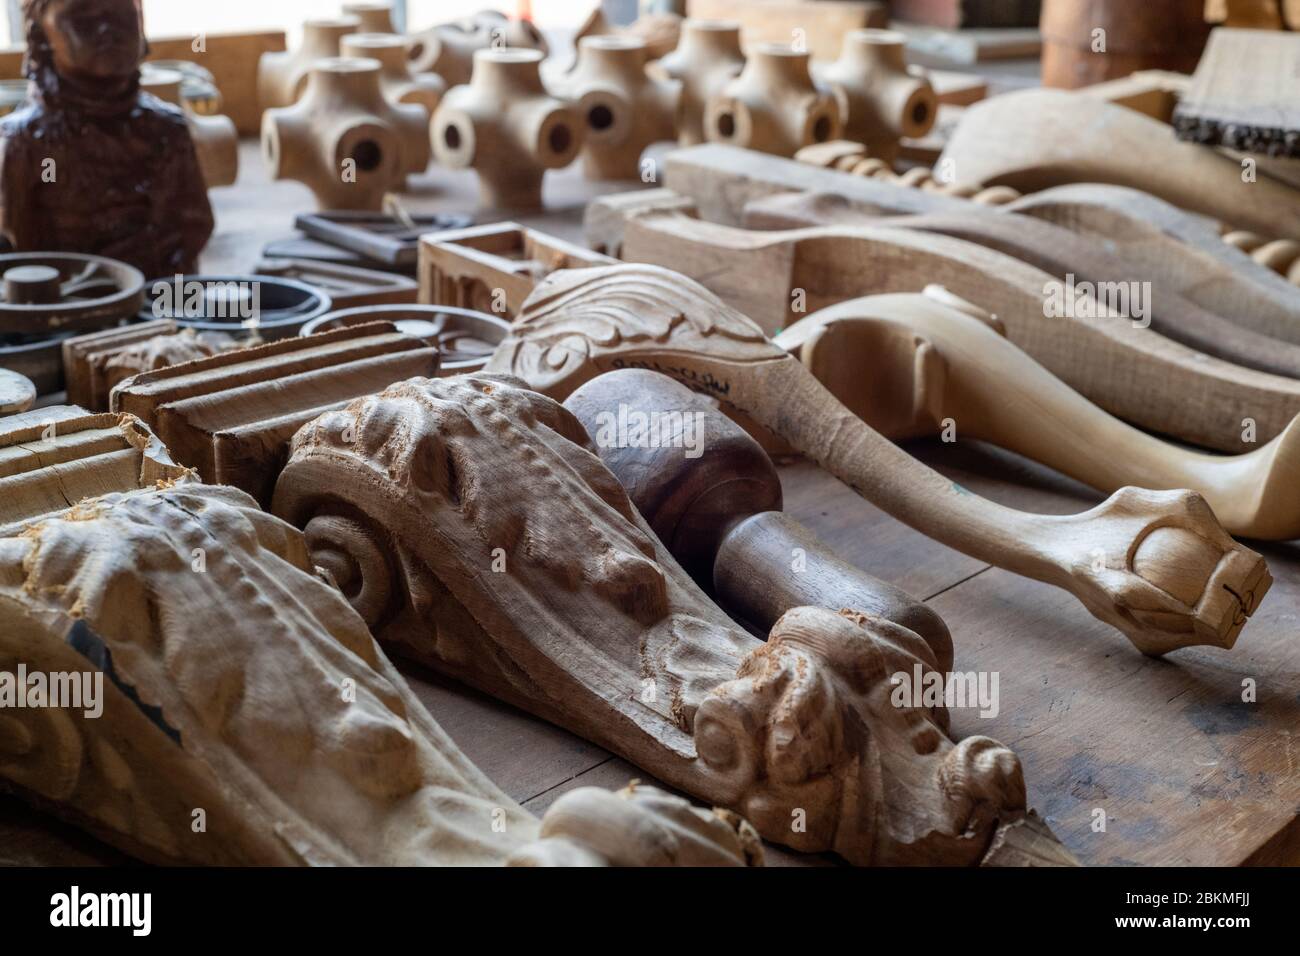 Various wooden parts of historic furniture, some imitation. Stock Photo